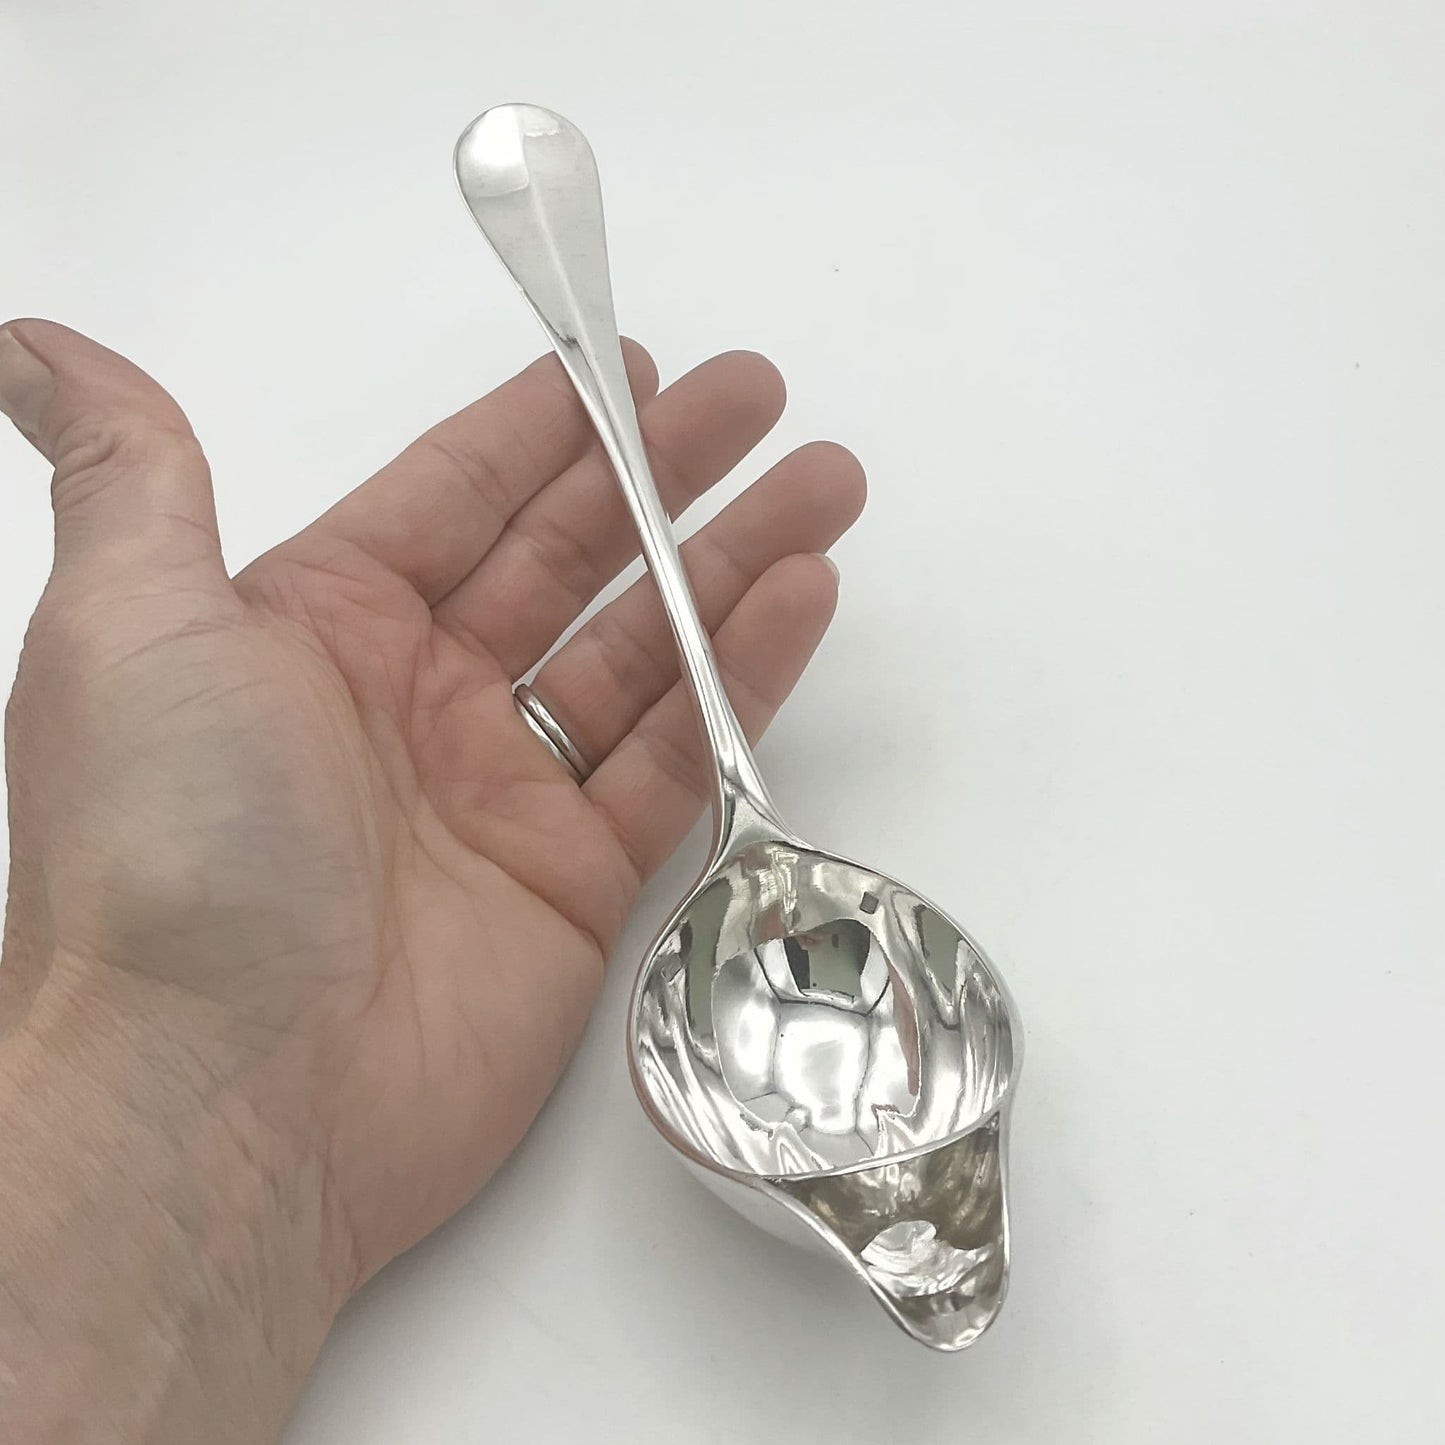 Antique French Silver Plated Sauce Ladle